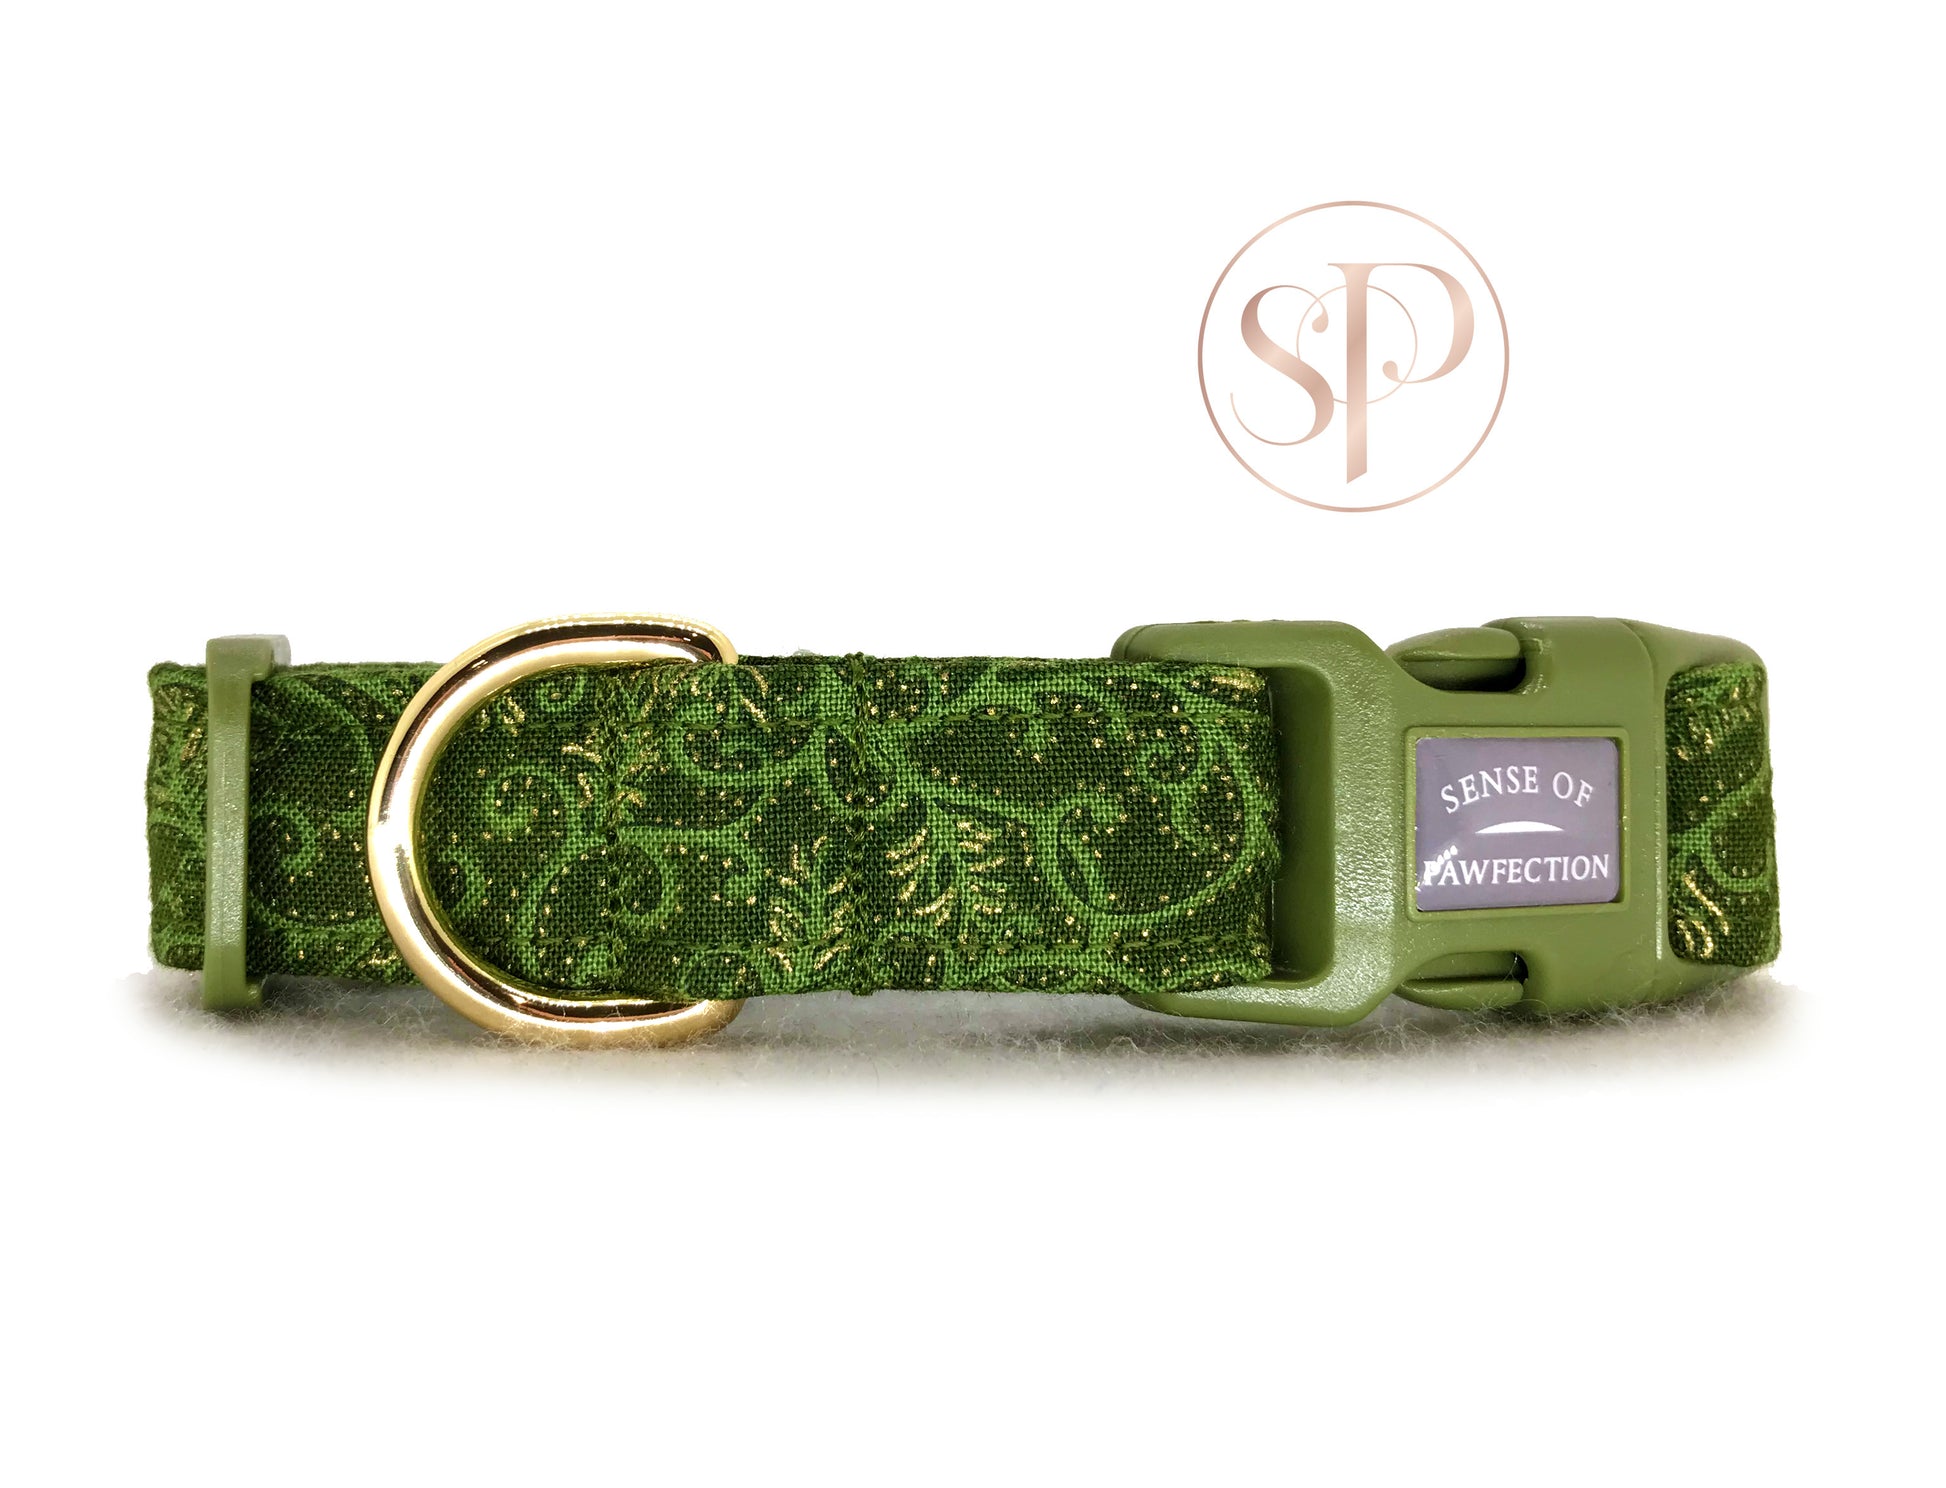 A sumptuous evergreen dog collar with swirling gold metallic elements.